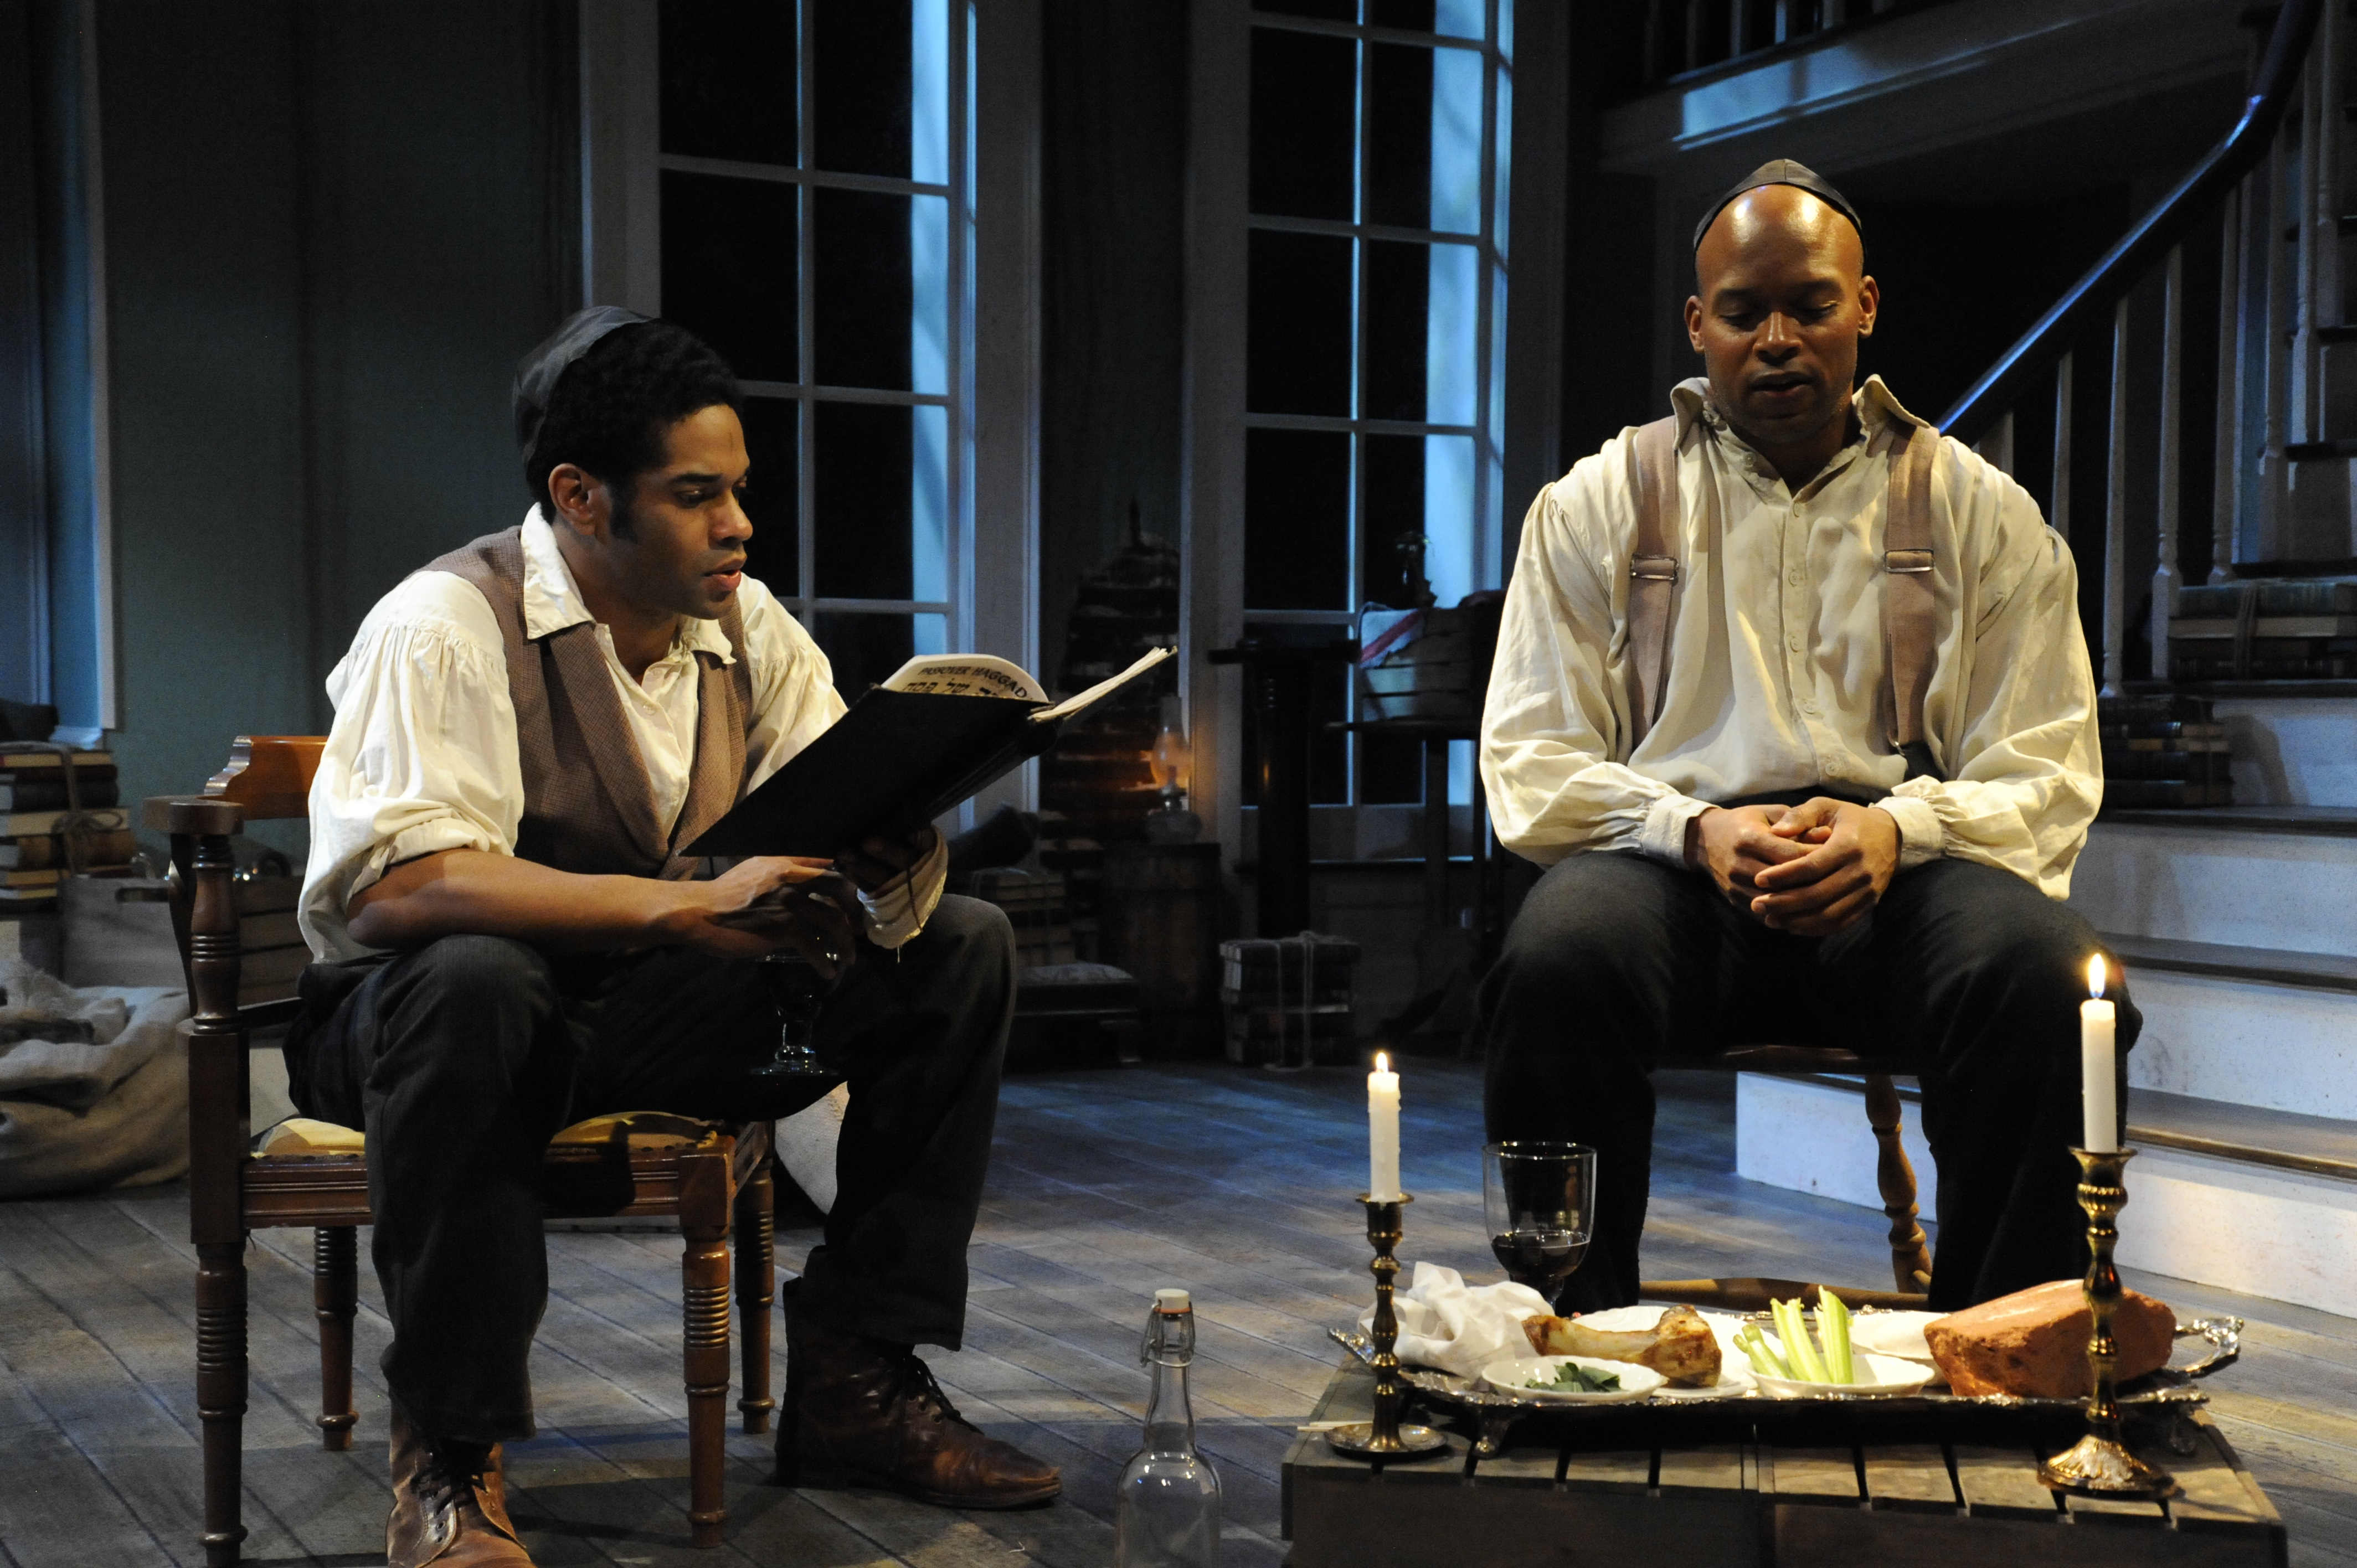 Laurence Curry (left) as John and Cajardo Lindsey (right) as Simon. (M. Stevens)